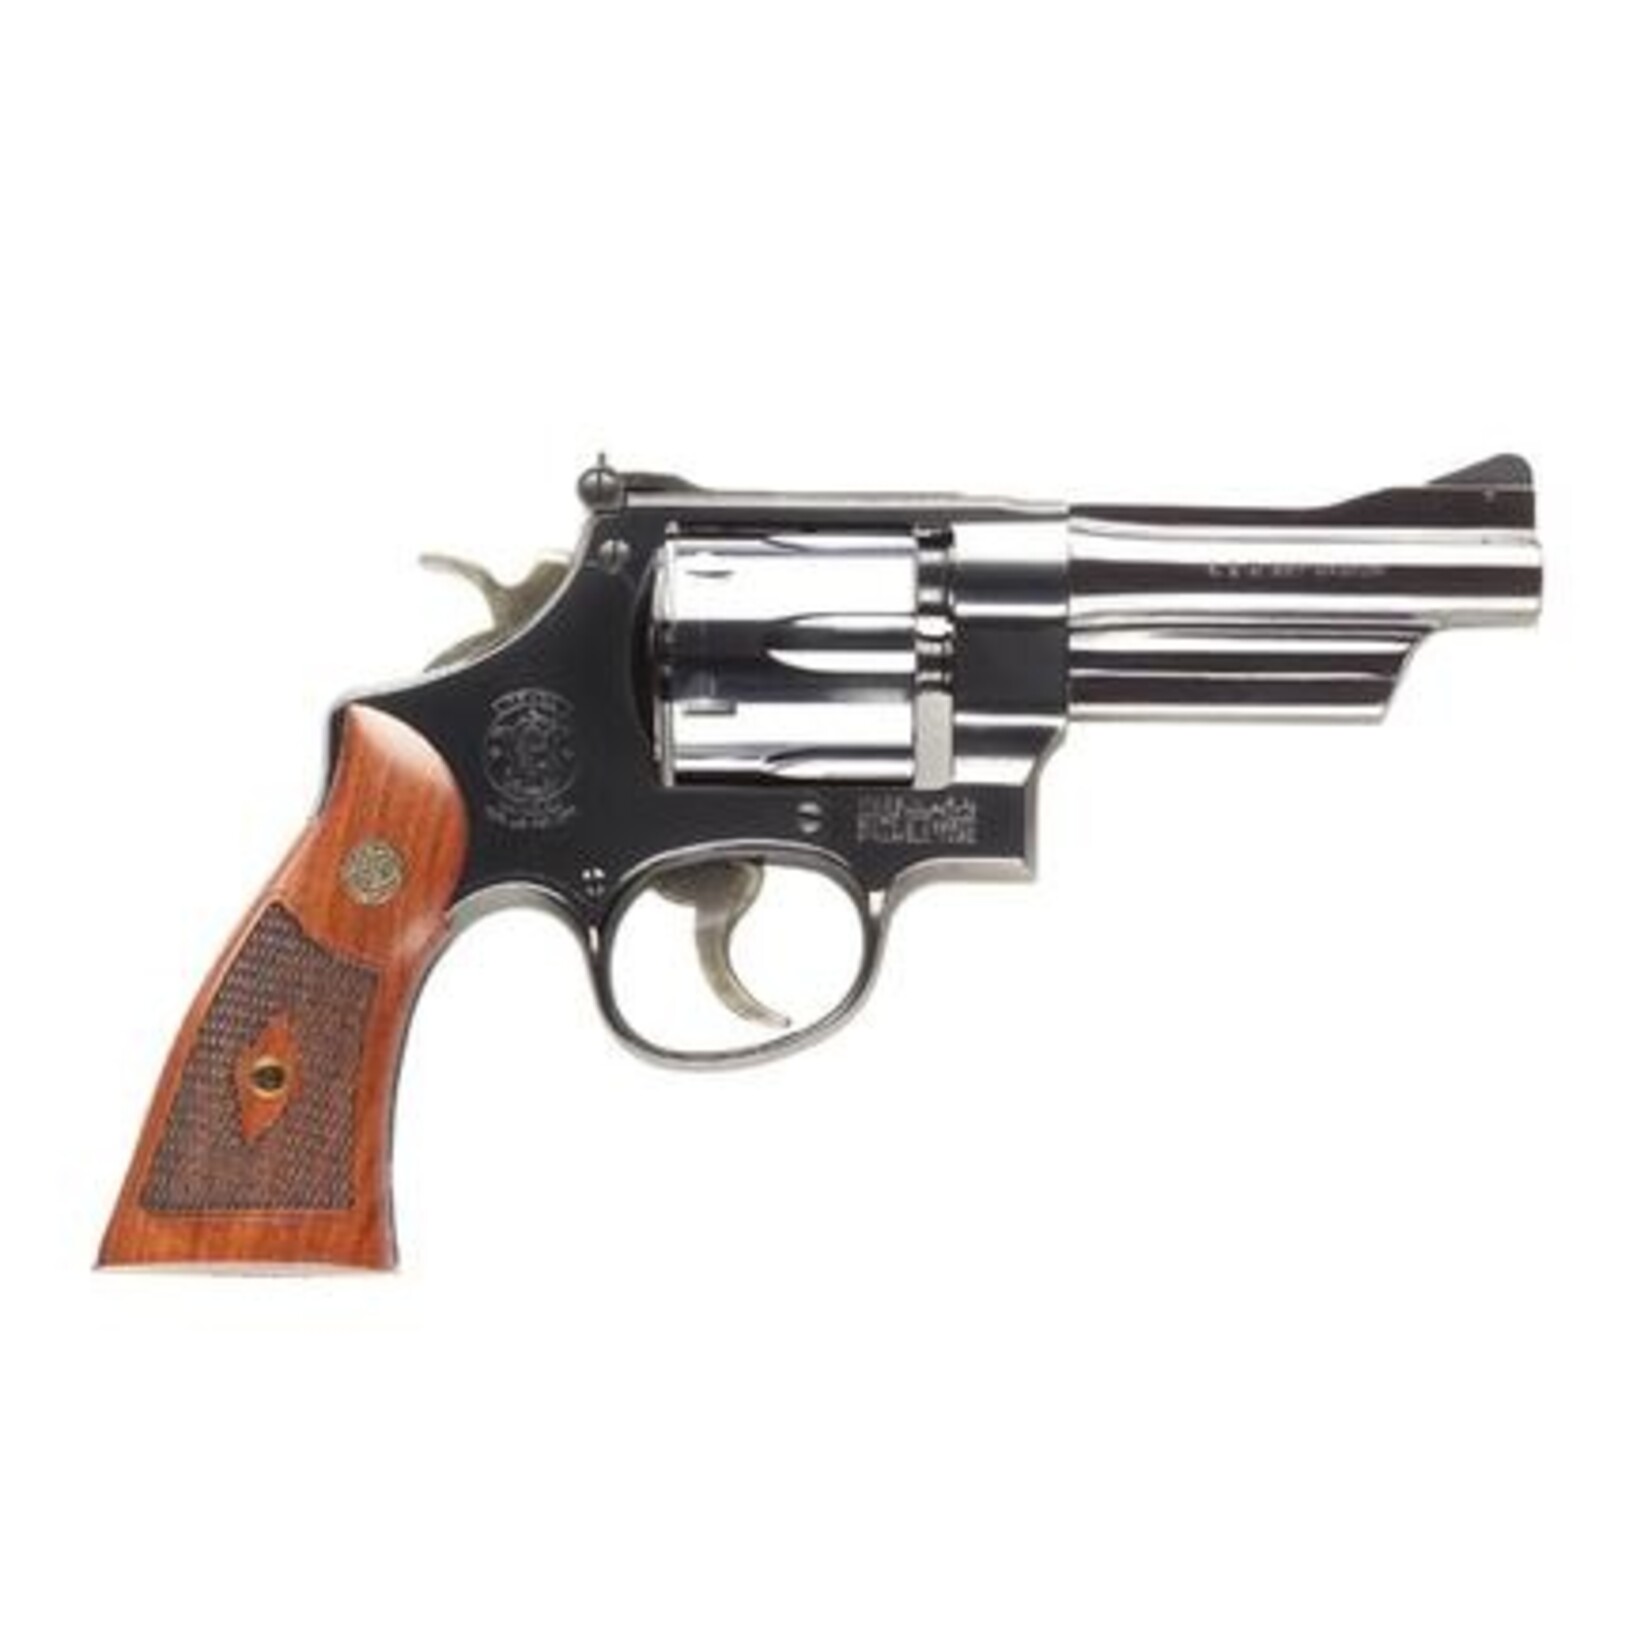 SMITH & WESSON S&W 27, 357 MAG, 4" BBL, WOOD GRIP, 6 ROUND